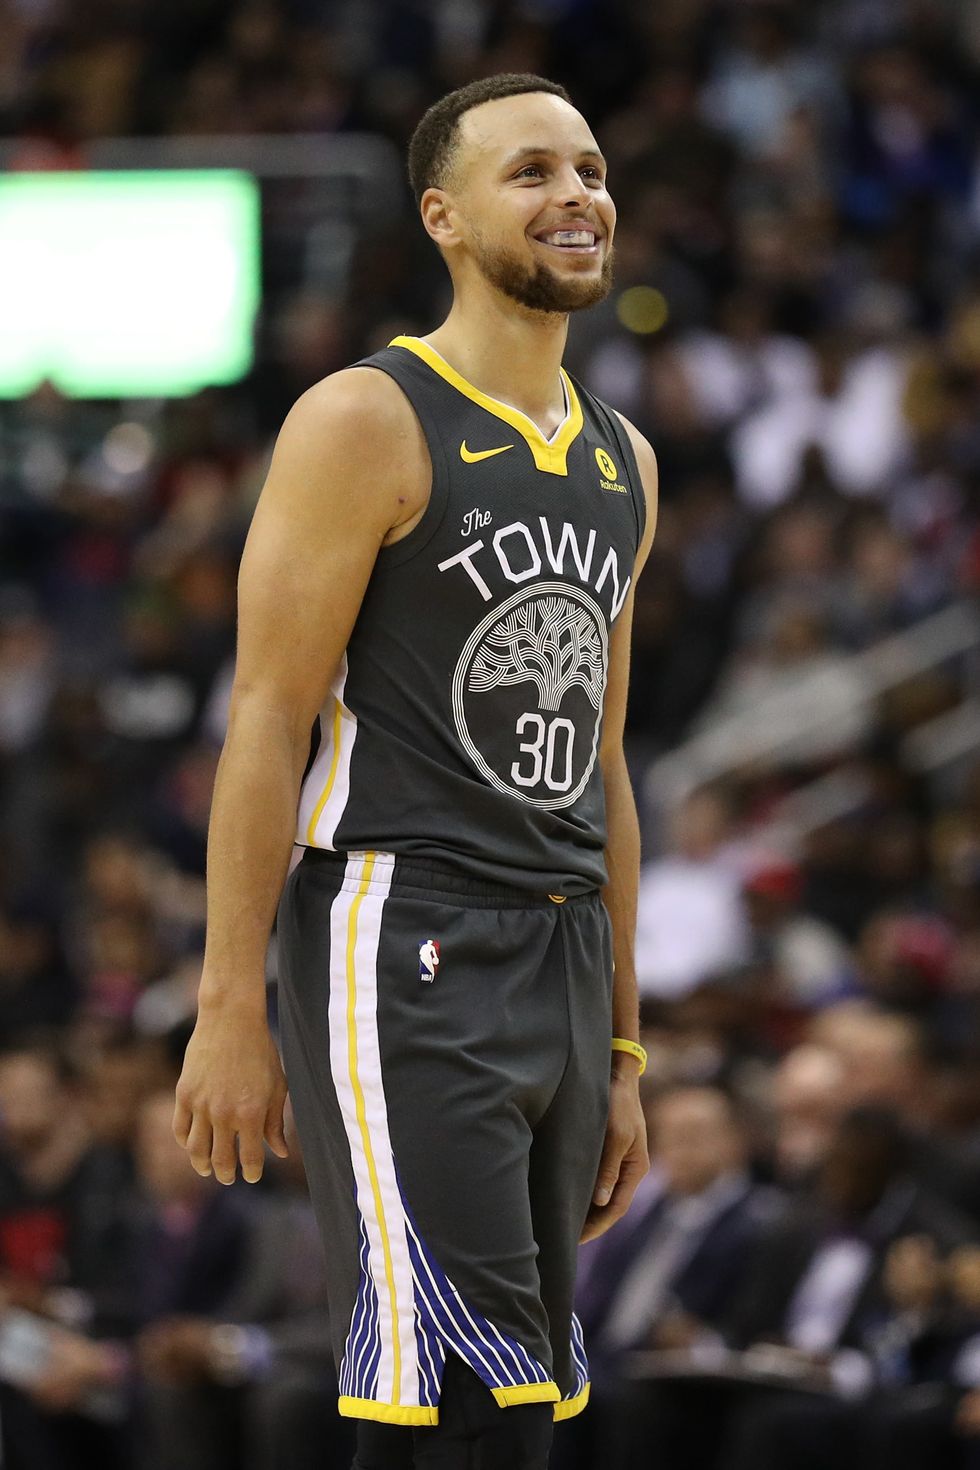 Fred Faour: 5 quick thoughts on the Warriors' Game 3 rout of the Rockets